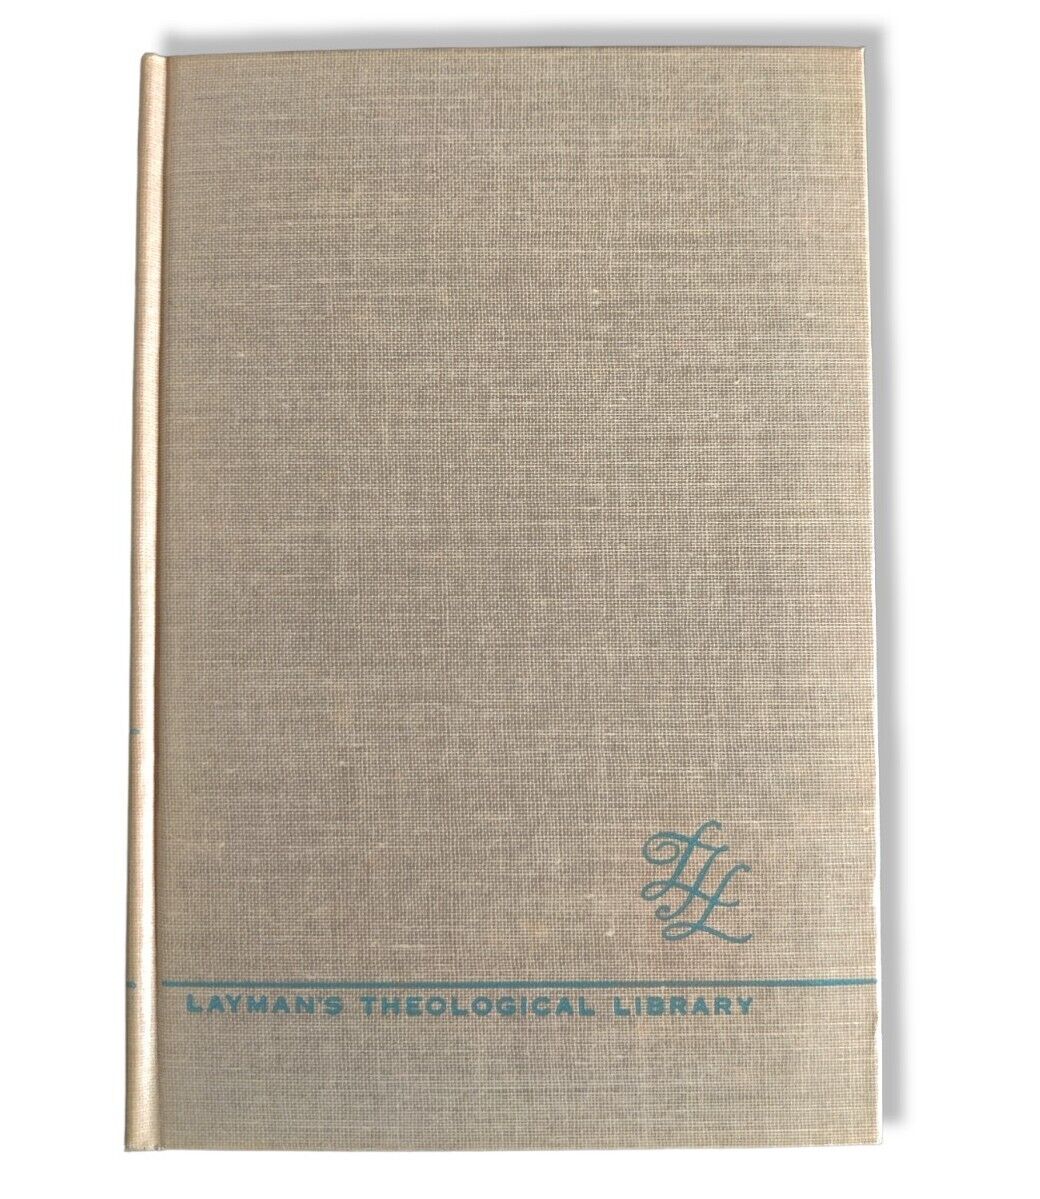 Layman\'s Theological Library Hardcover Believing In God 1956 Daniel Jenkins